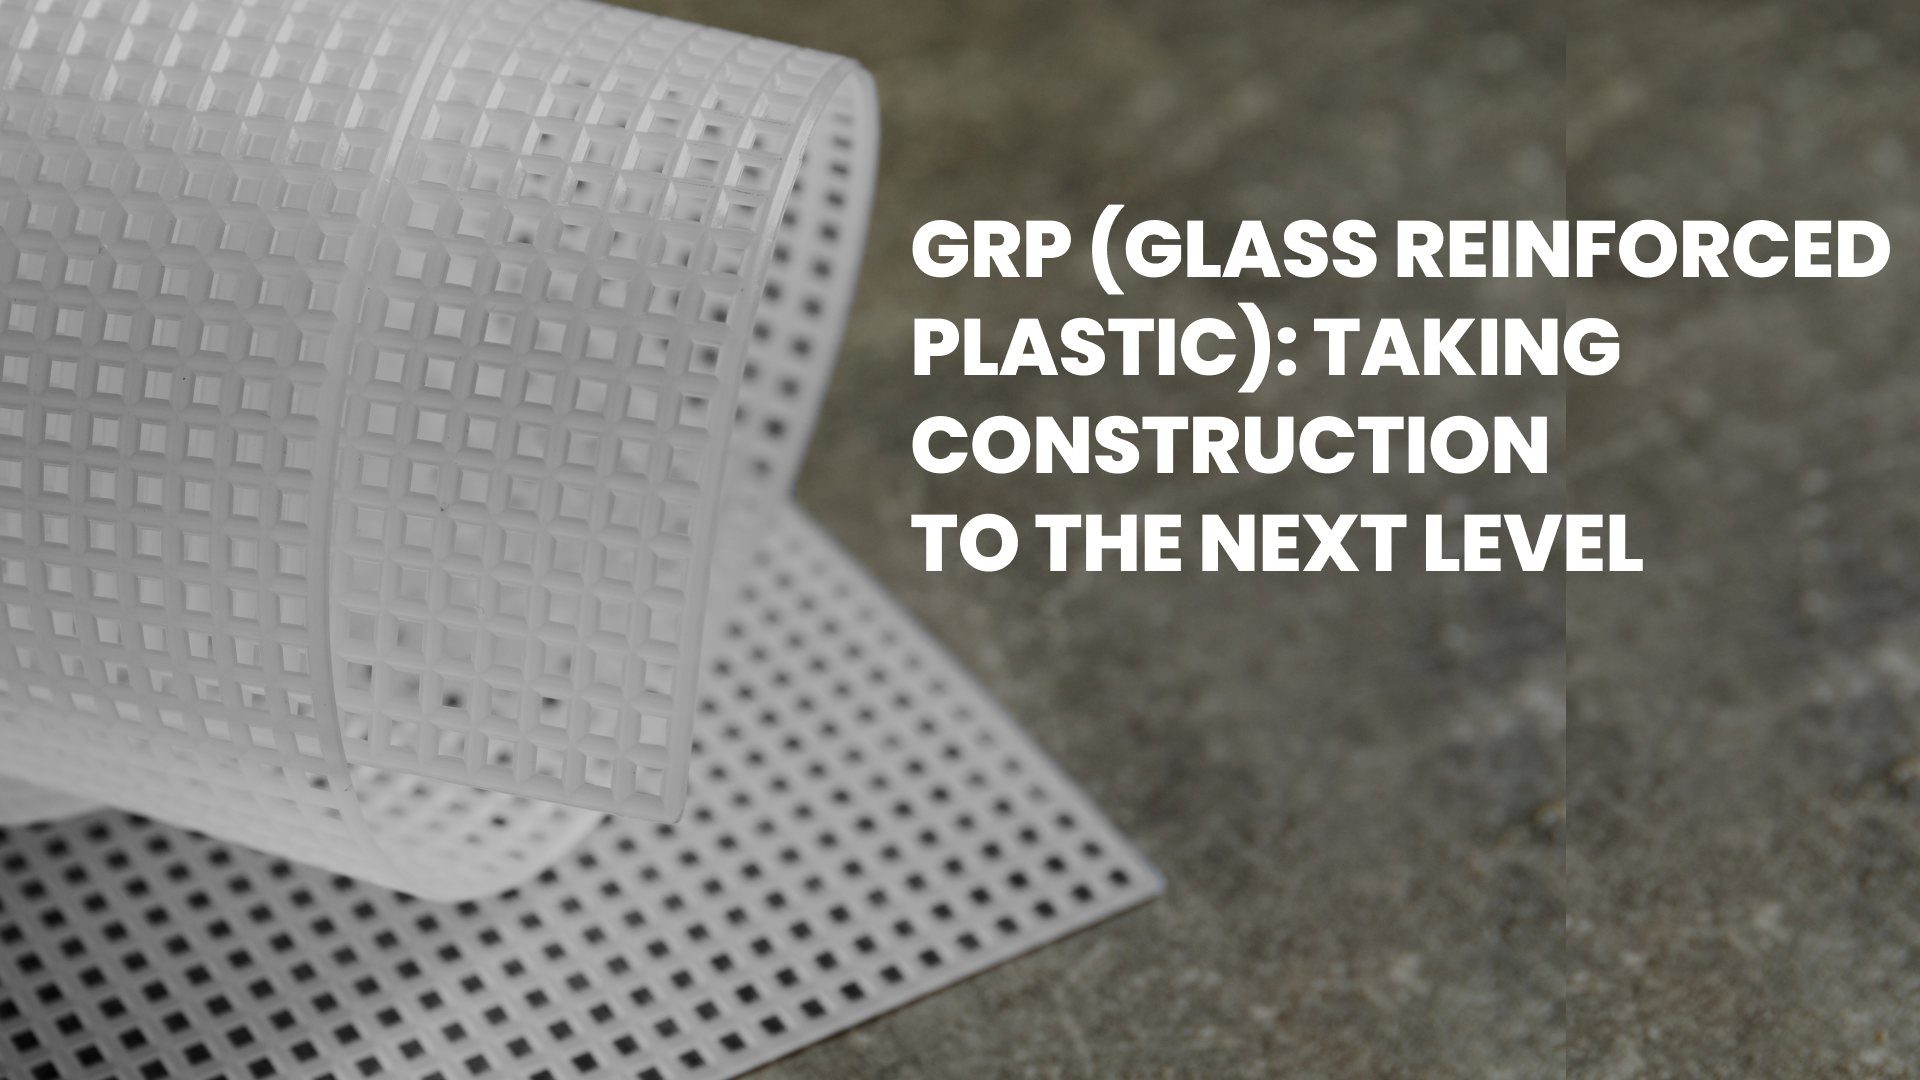 GRP (Glass Reinforced Plastic): Taking Construction to the Next Level